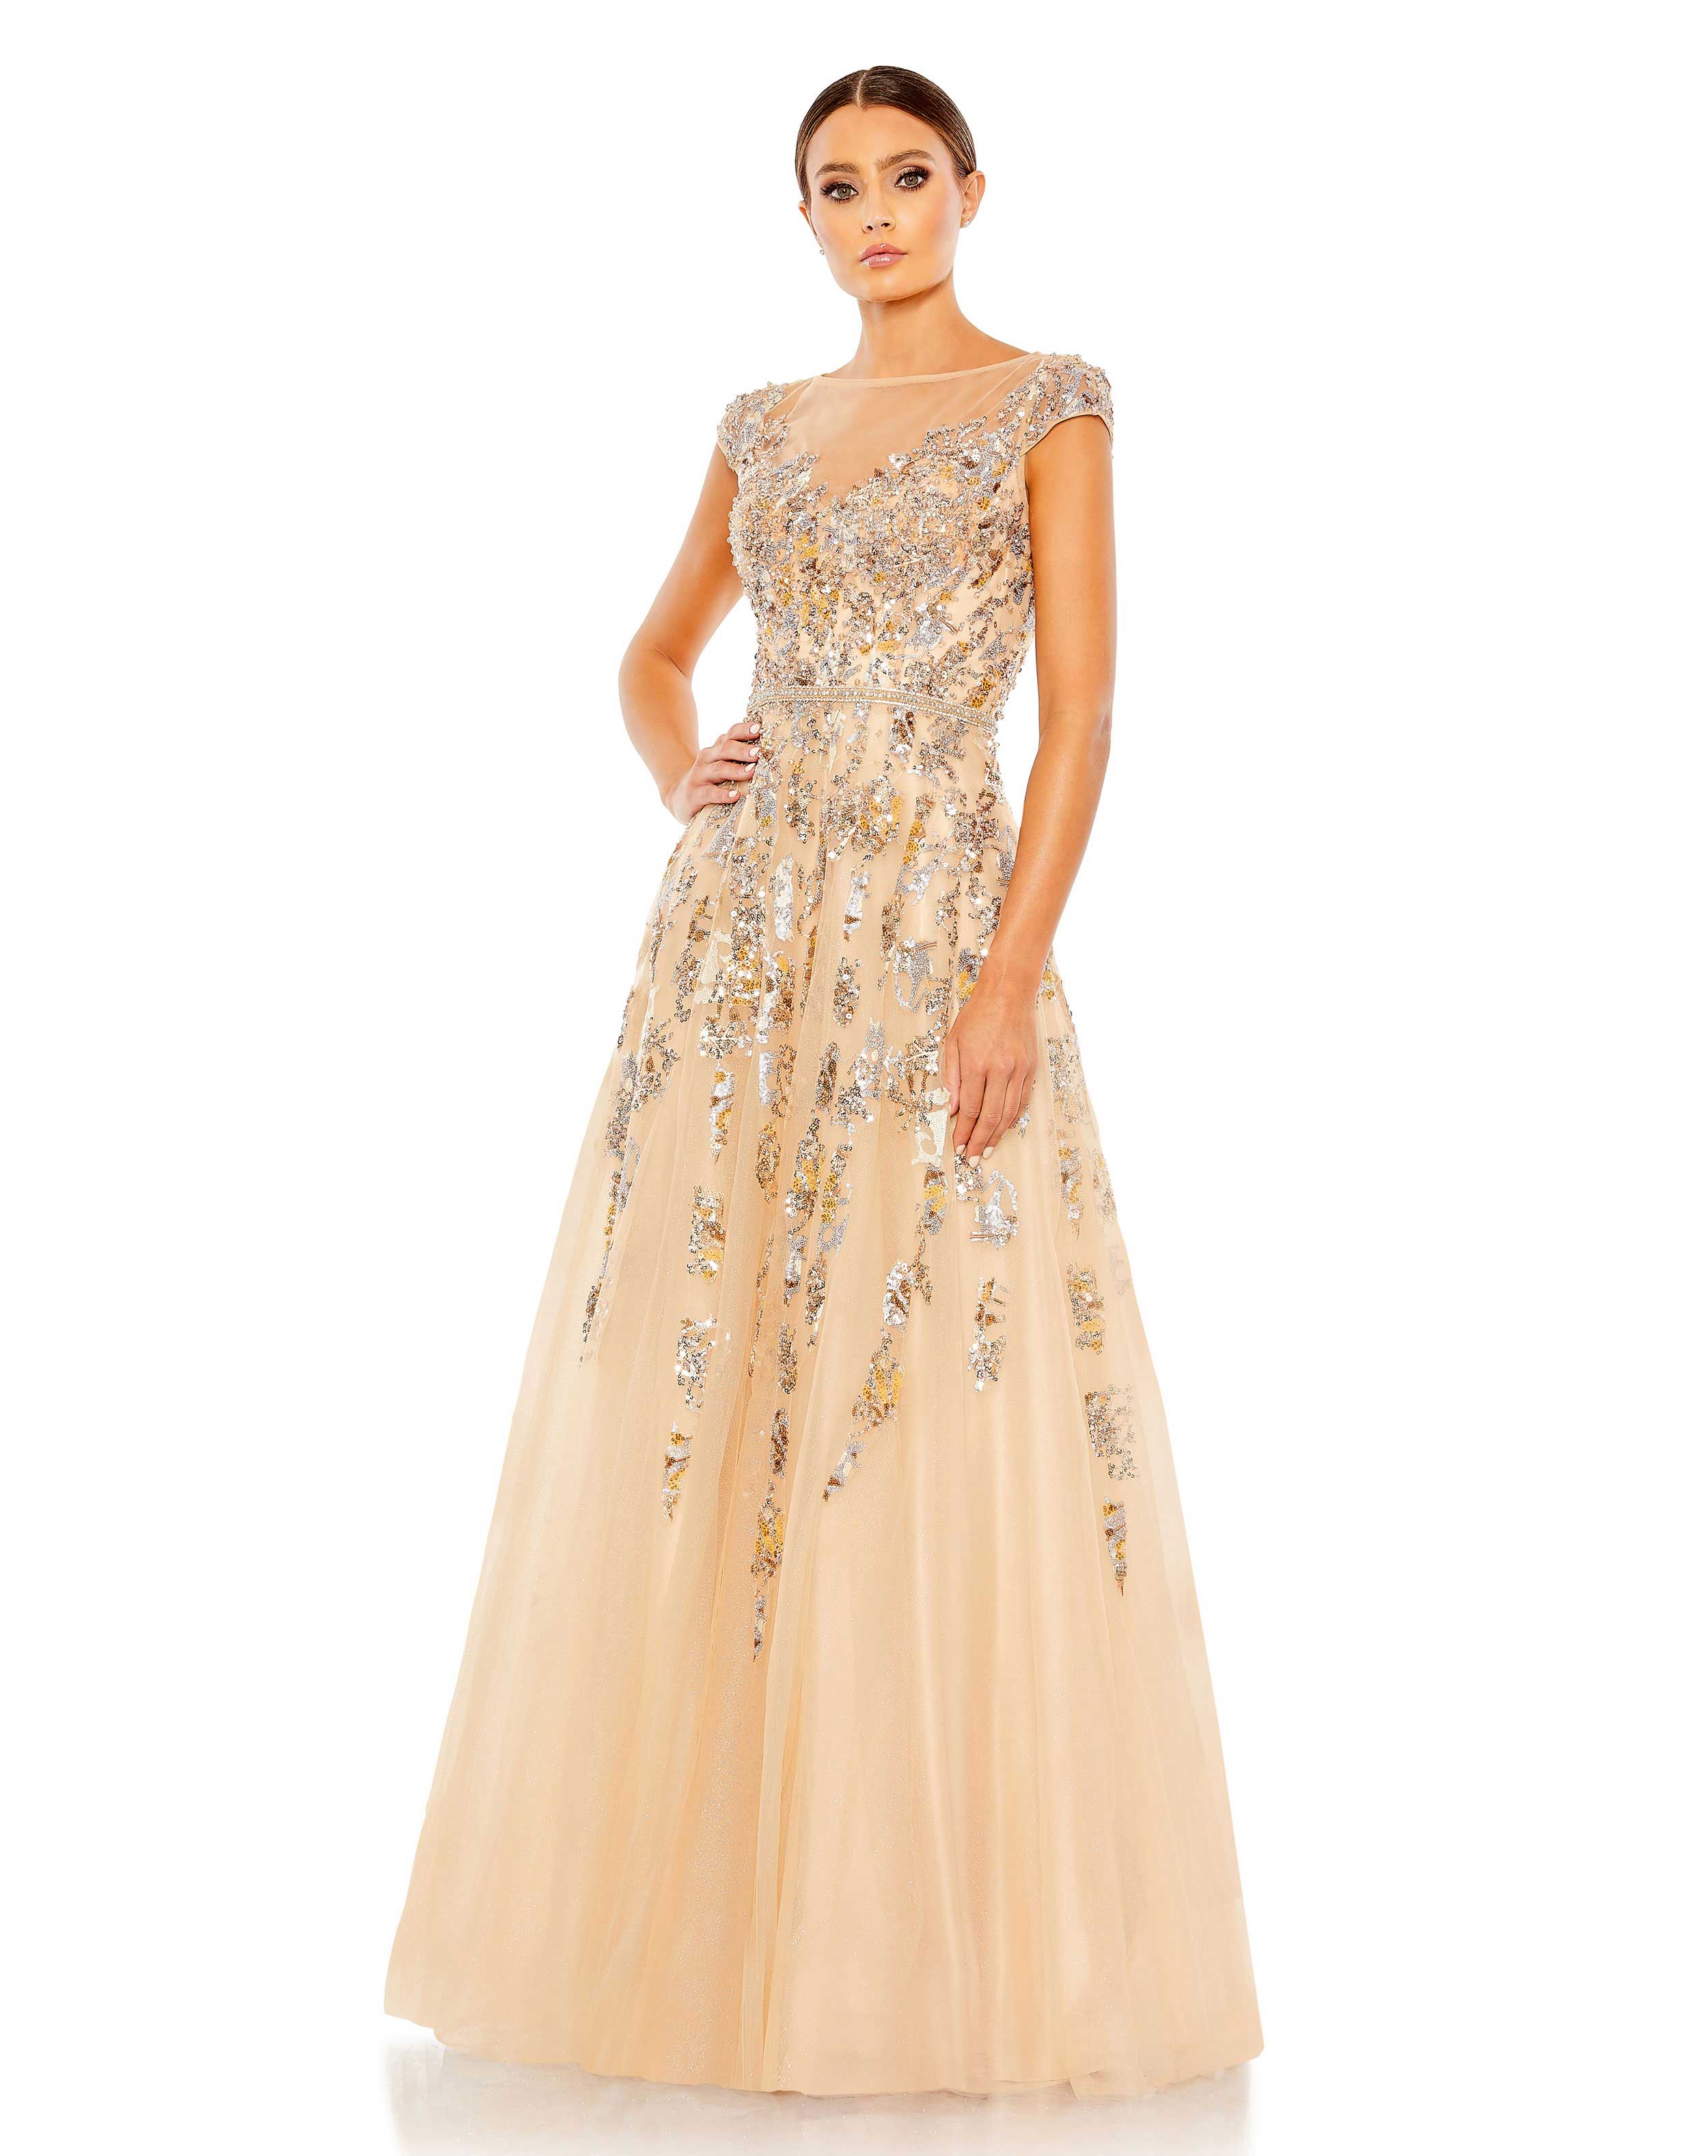 Embellished Cap Sleeve Cutout Back Gown - FINAL SALE